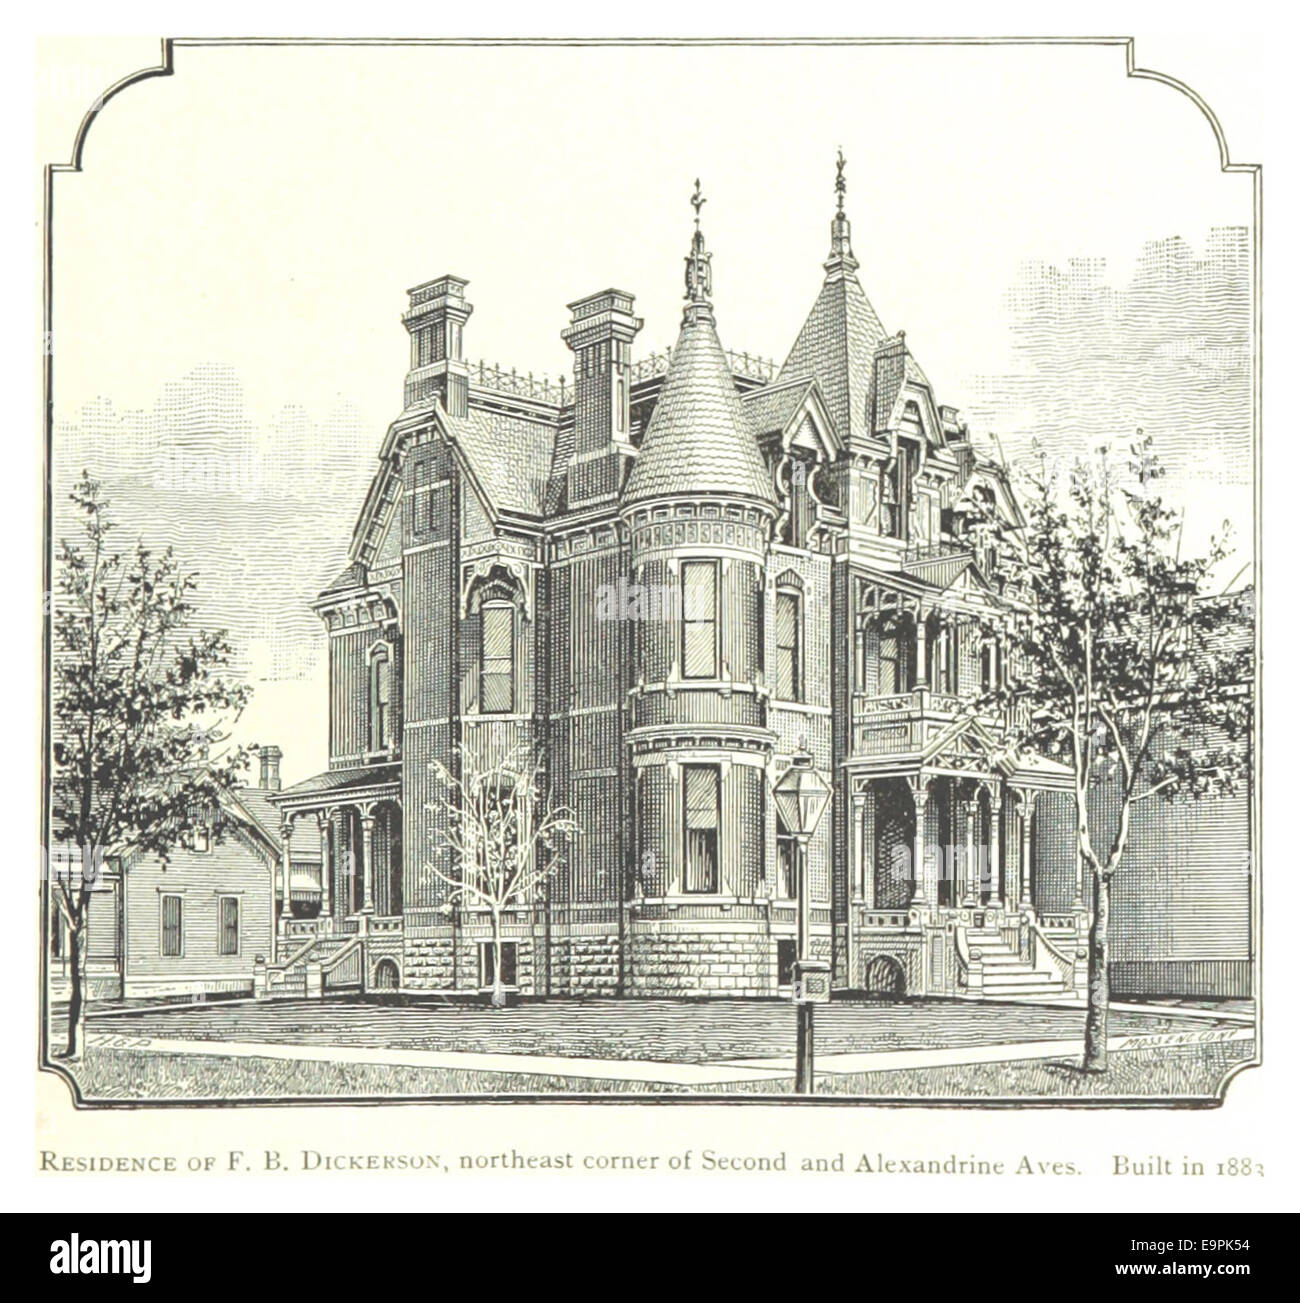 FARMER(1884) Detroit, p475 RESIDENCE OF F.B. DICKERSON, NORTHEAST CORNER OF SECOND AND ALEXANDRINE AVES. BUILT IN 1883 Stock Photo